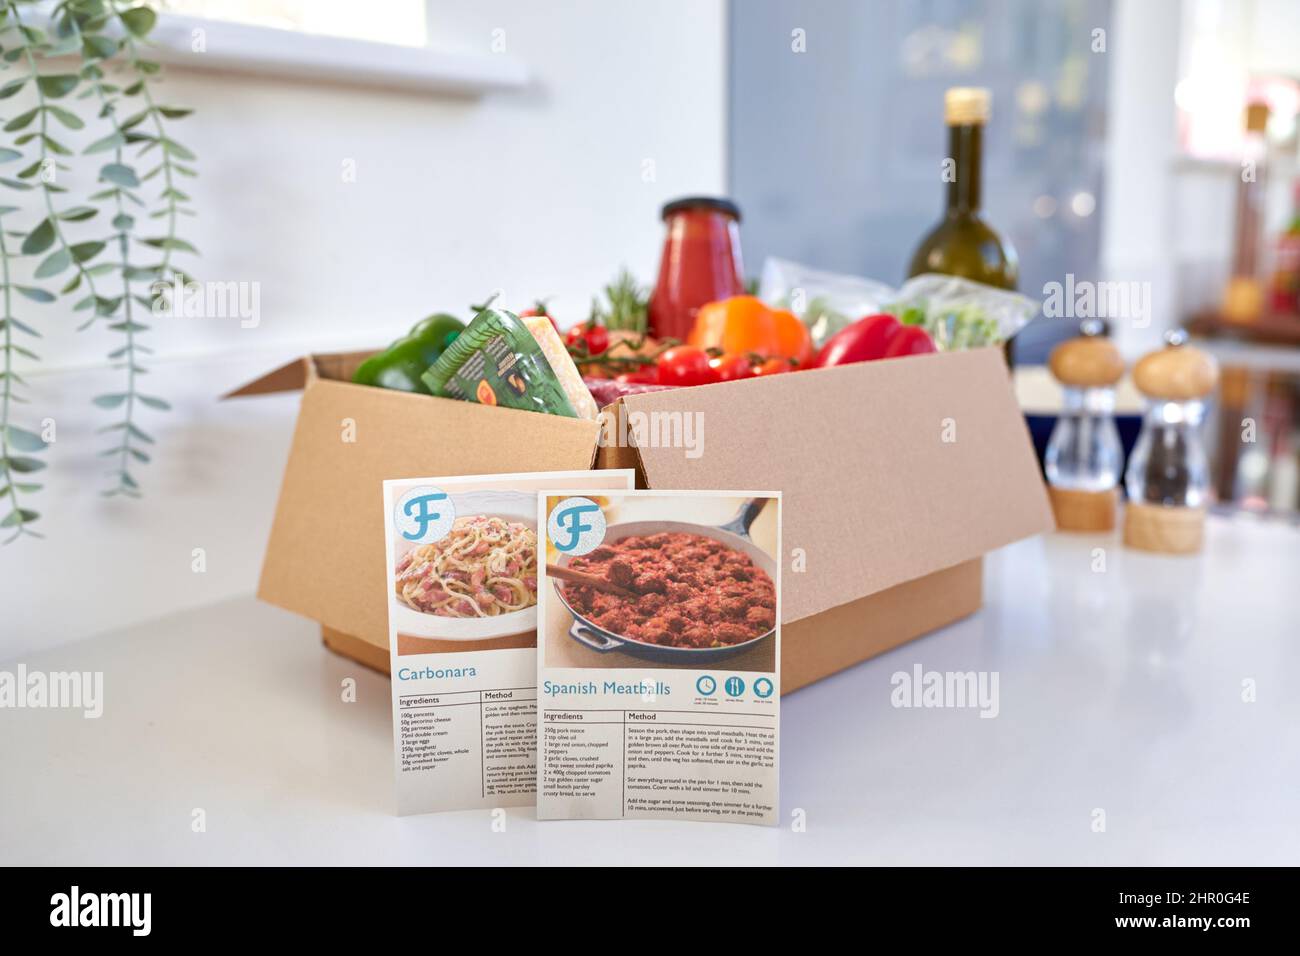 Recipe Cards By Box From Online Meal Food Recipe Kit With Fresh Ingredients Delivered To Home Stock Photo